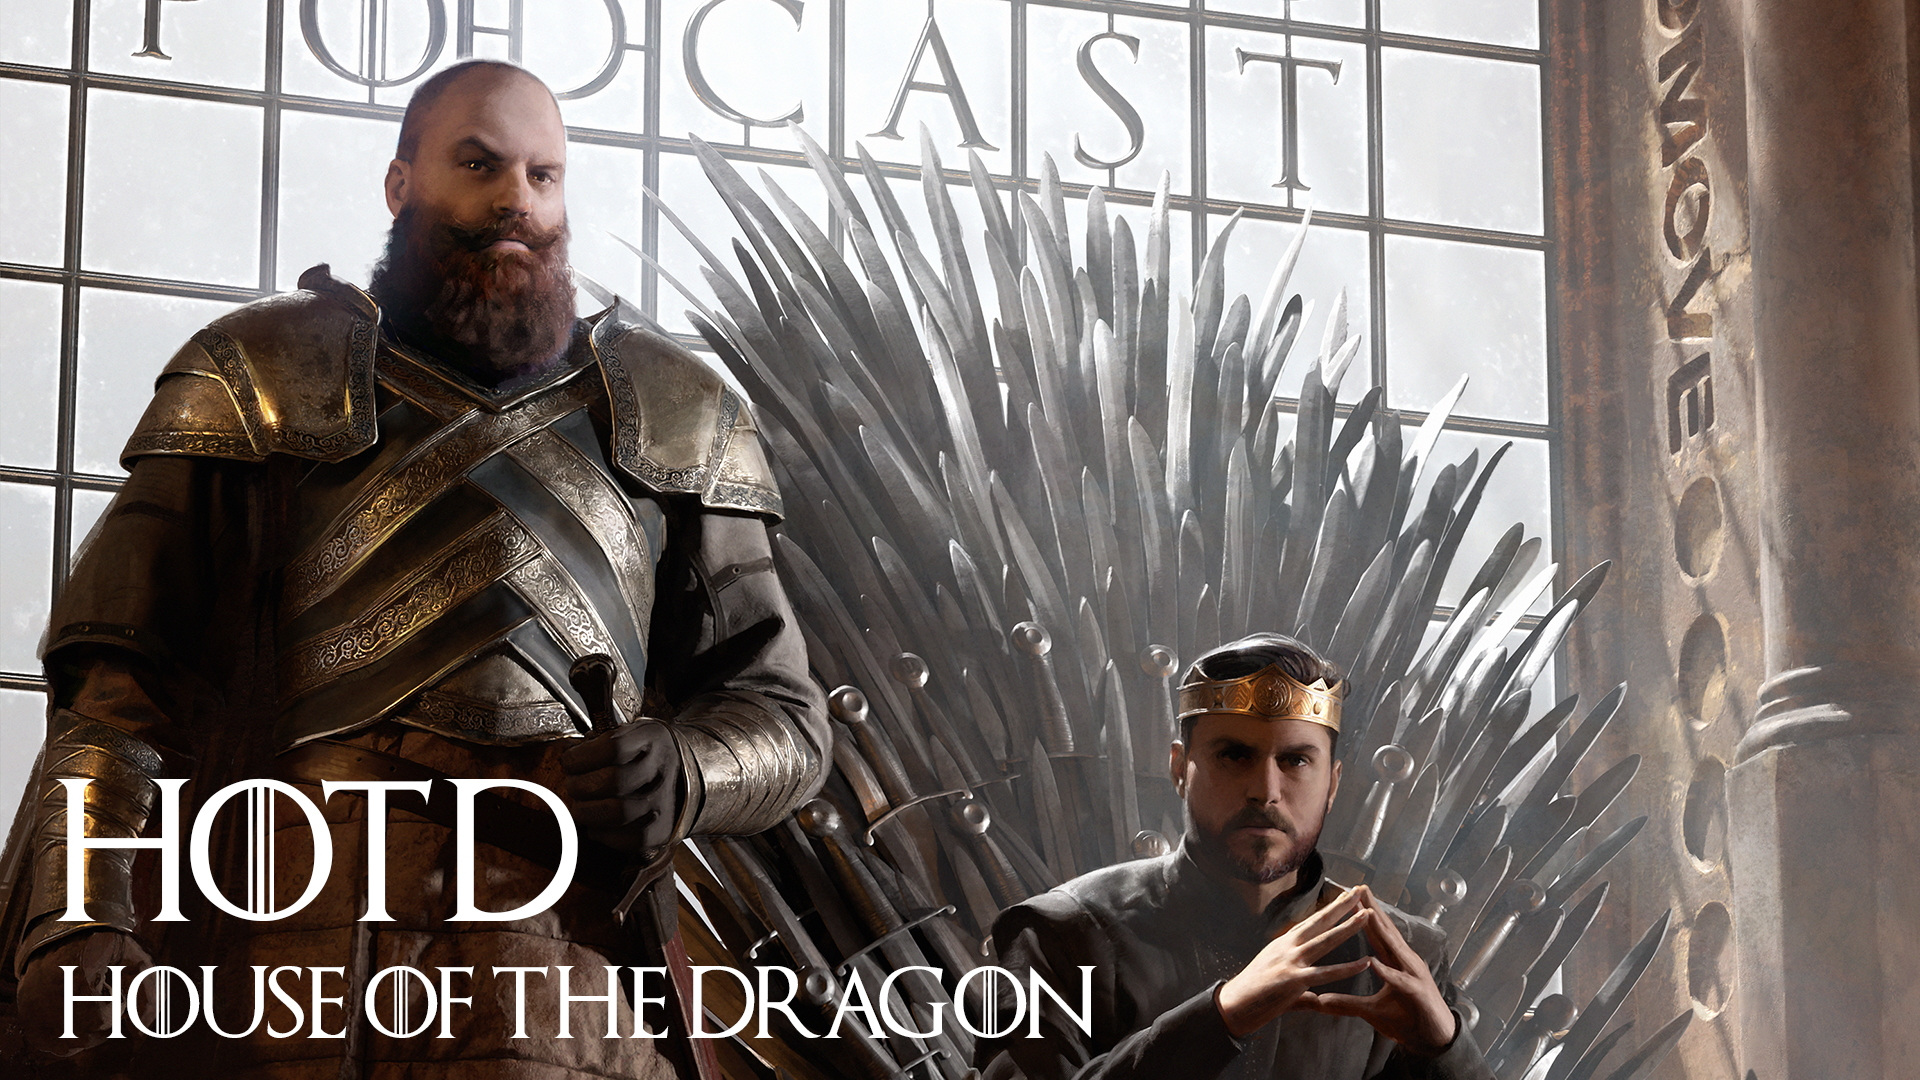 House of the Dragon, episode 1: “Heirs of the Dragon” and its